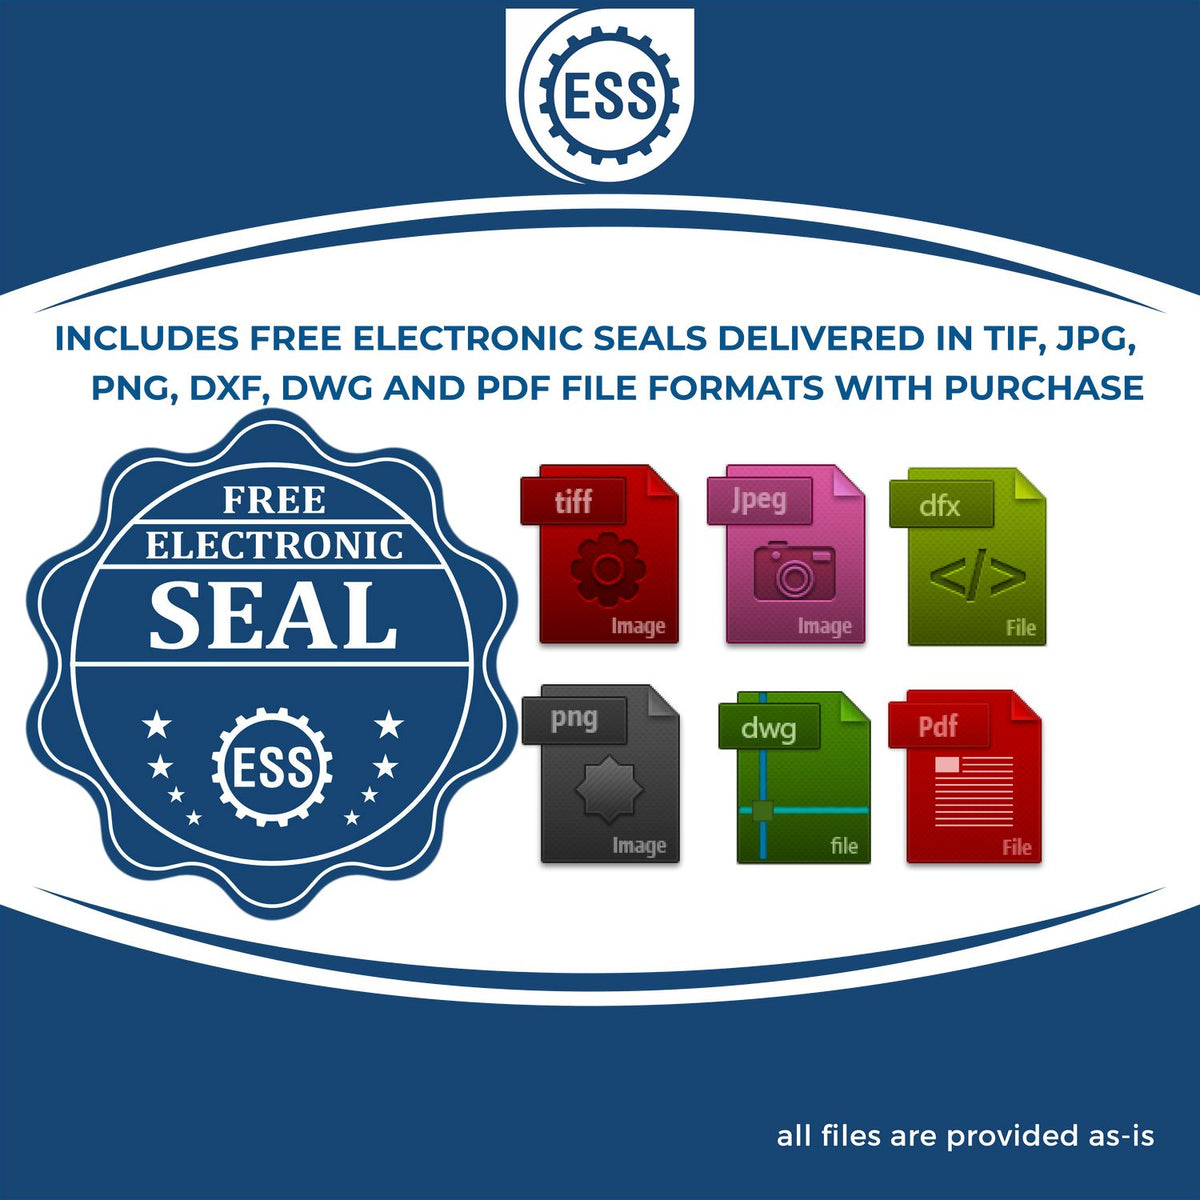 An infographic for the free electronic seal for the Wooden Handle North Dakota Rectangular Notary Public Stamp illustrating the different file type icons such as DXF, DWG, TIF, JPG and PNG.